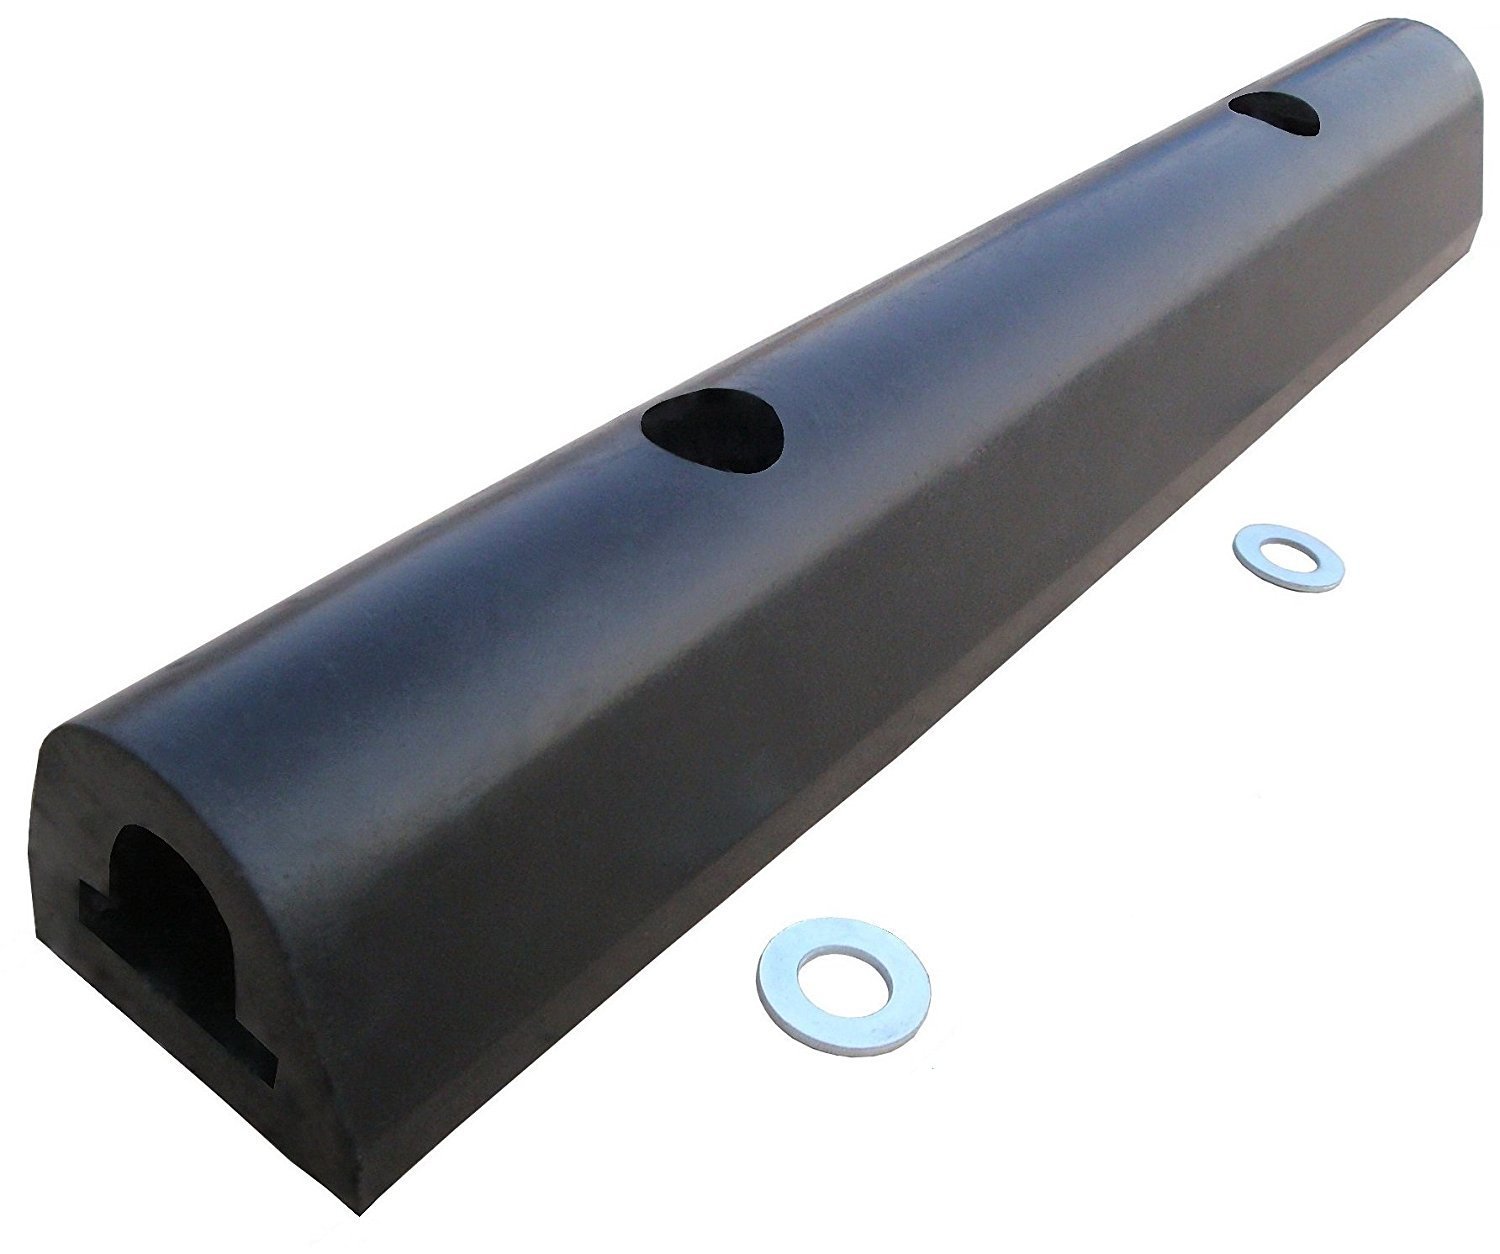 YM D6466 Rubber Extruded Dock Bumper